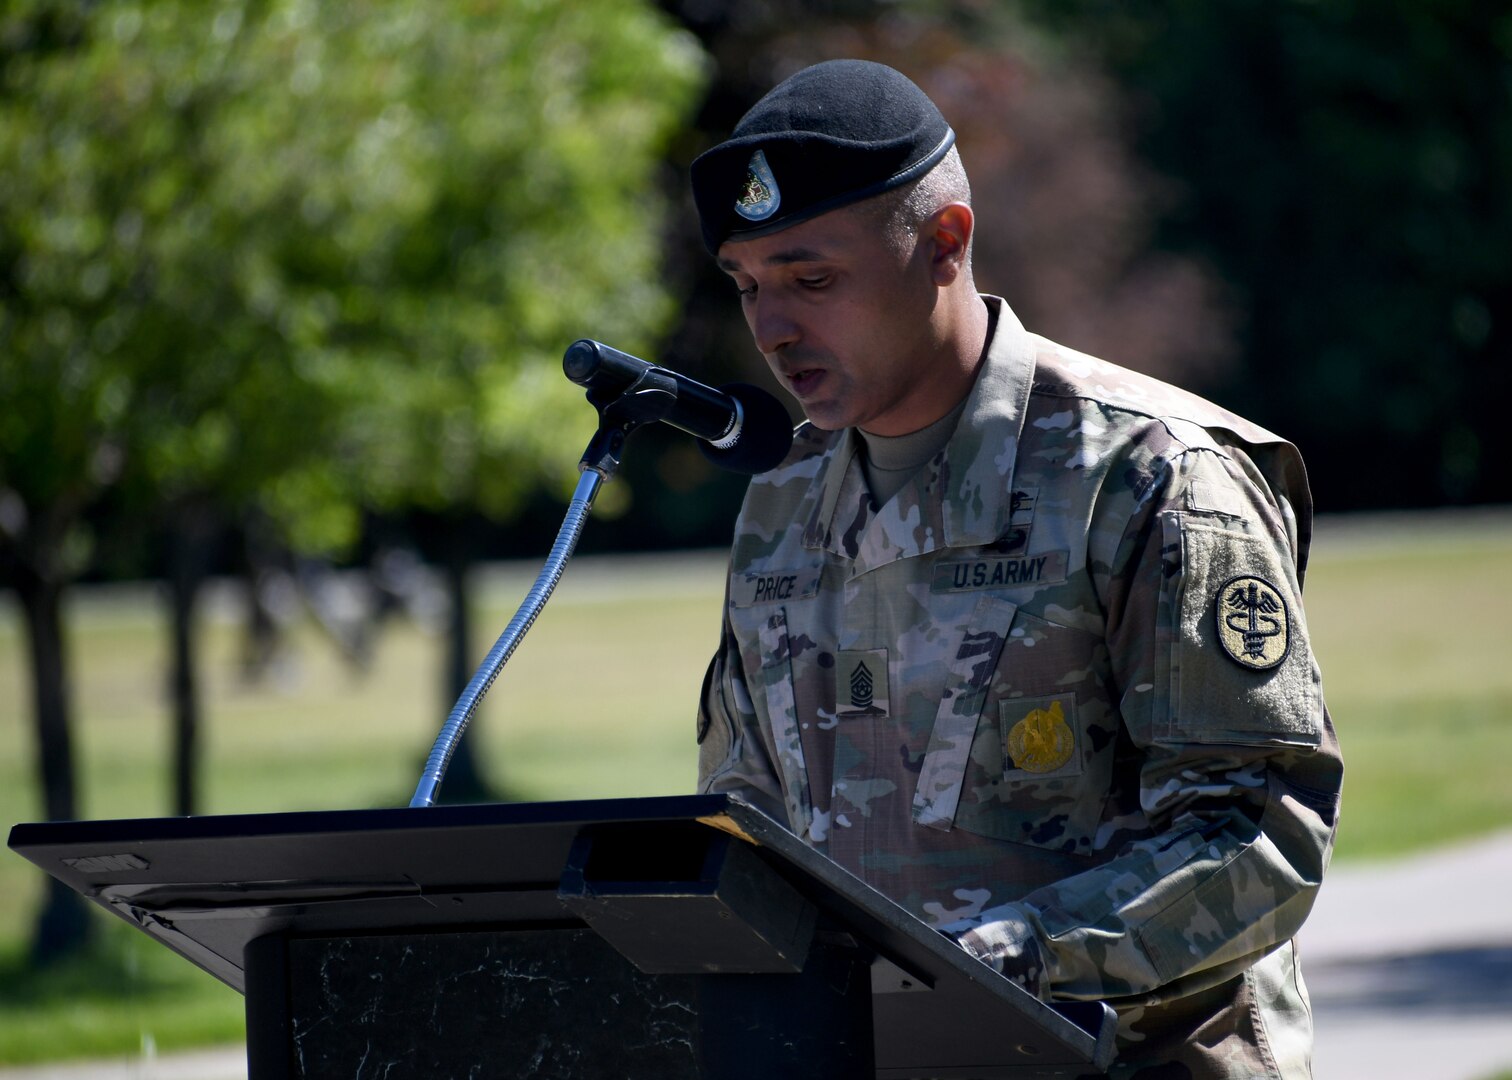 Command Sgt. Maj. Eric N. Price, the senior enlisted leader of the Fort Drum Medical Activity, speaks to attendees during his assumption of responsibility ceremony at Fort Drum, N.Y., June 17, 2021.  Price officially assumed responsibility as the MEDDAC’s senior noncommissioned officer during the ceremony and will now serve as the commander’s principal advisor on enlisted matters.  (U.S. Army photo by Warren W. Wright Jr., Fort Drum Medical Activity Public Affairs)